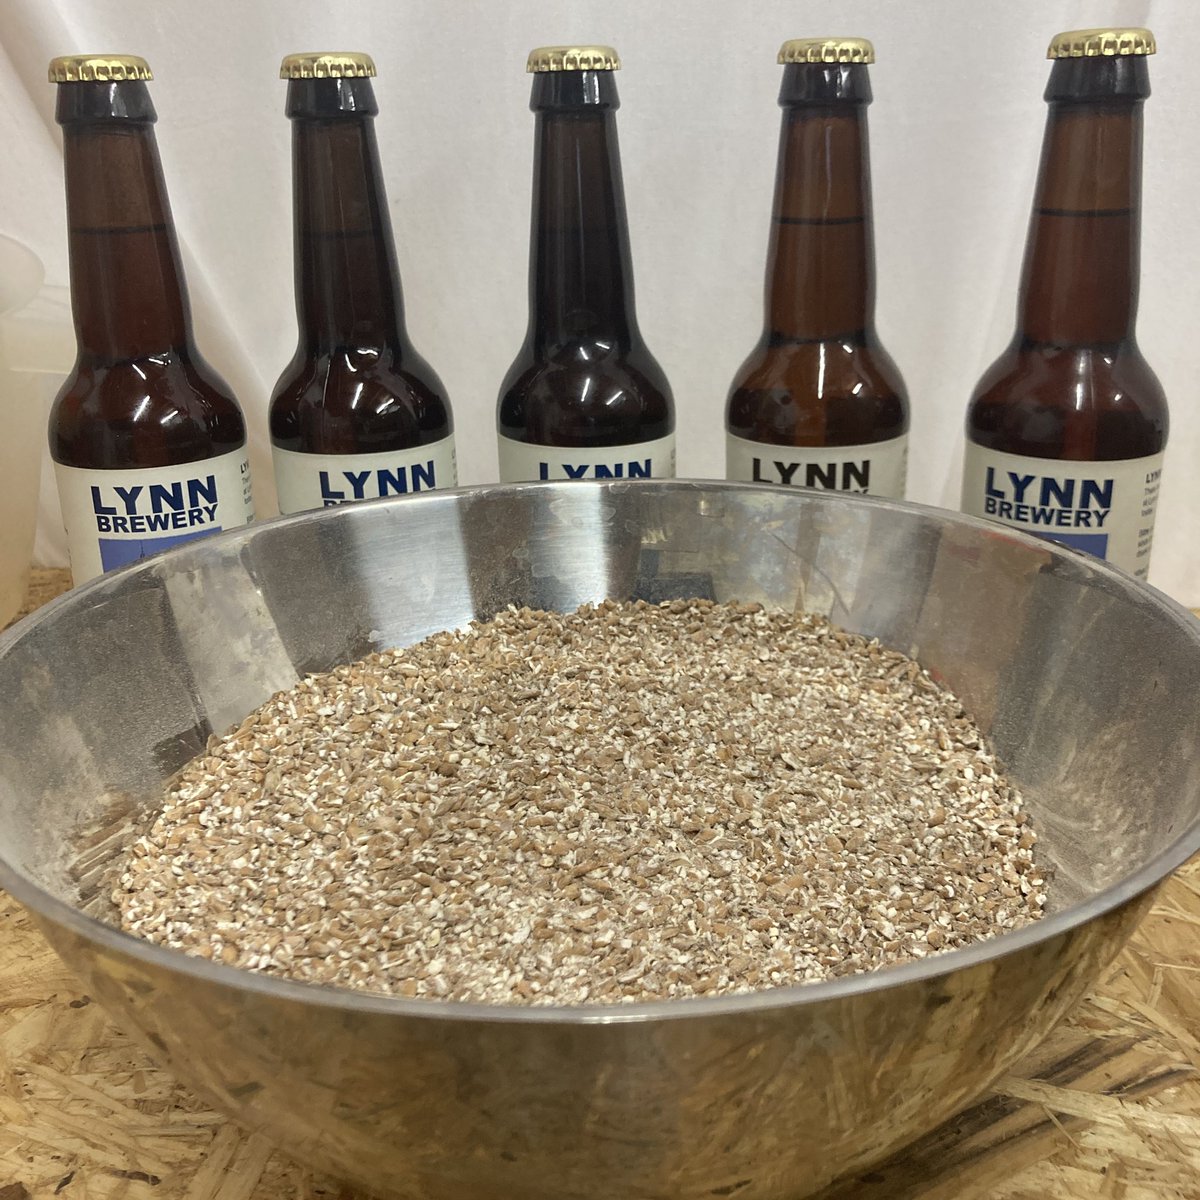 Brew Day again! Wheat malt from Crisp Malt ready for mashing. A special order batch of Hefeweizen will be safely in the fermenter by the end of the day.

#kingslynn #craftbeer #norfolkbrewery #westnorfolk #lovewestnorfolk #buylocalnorfolk #buylocal #discoverkingslynn #norfolkbeer